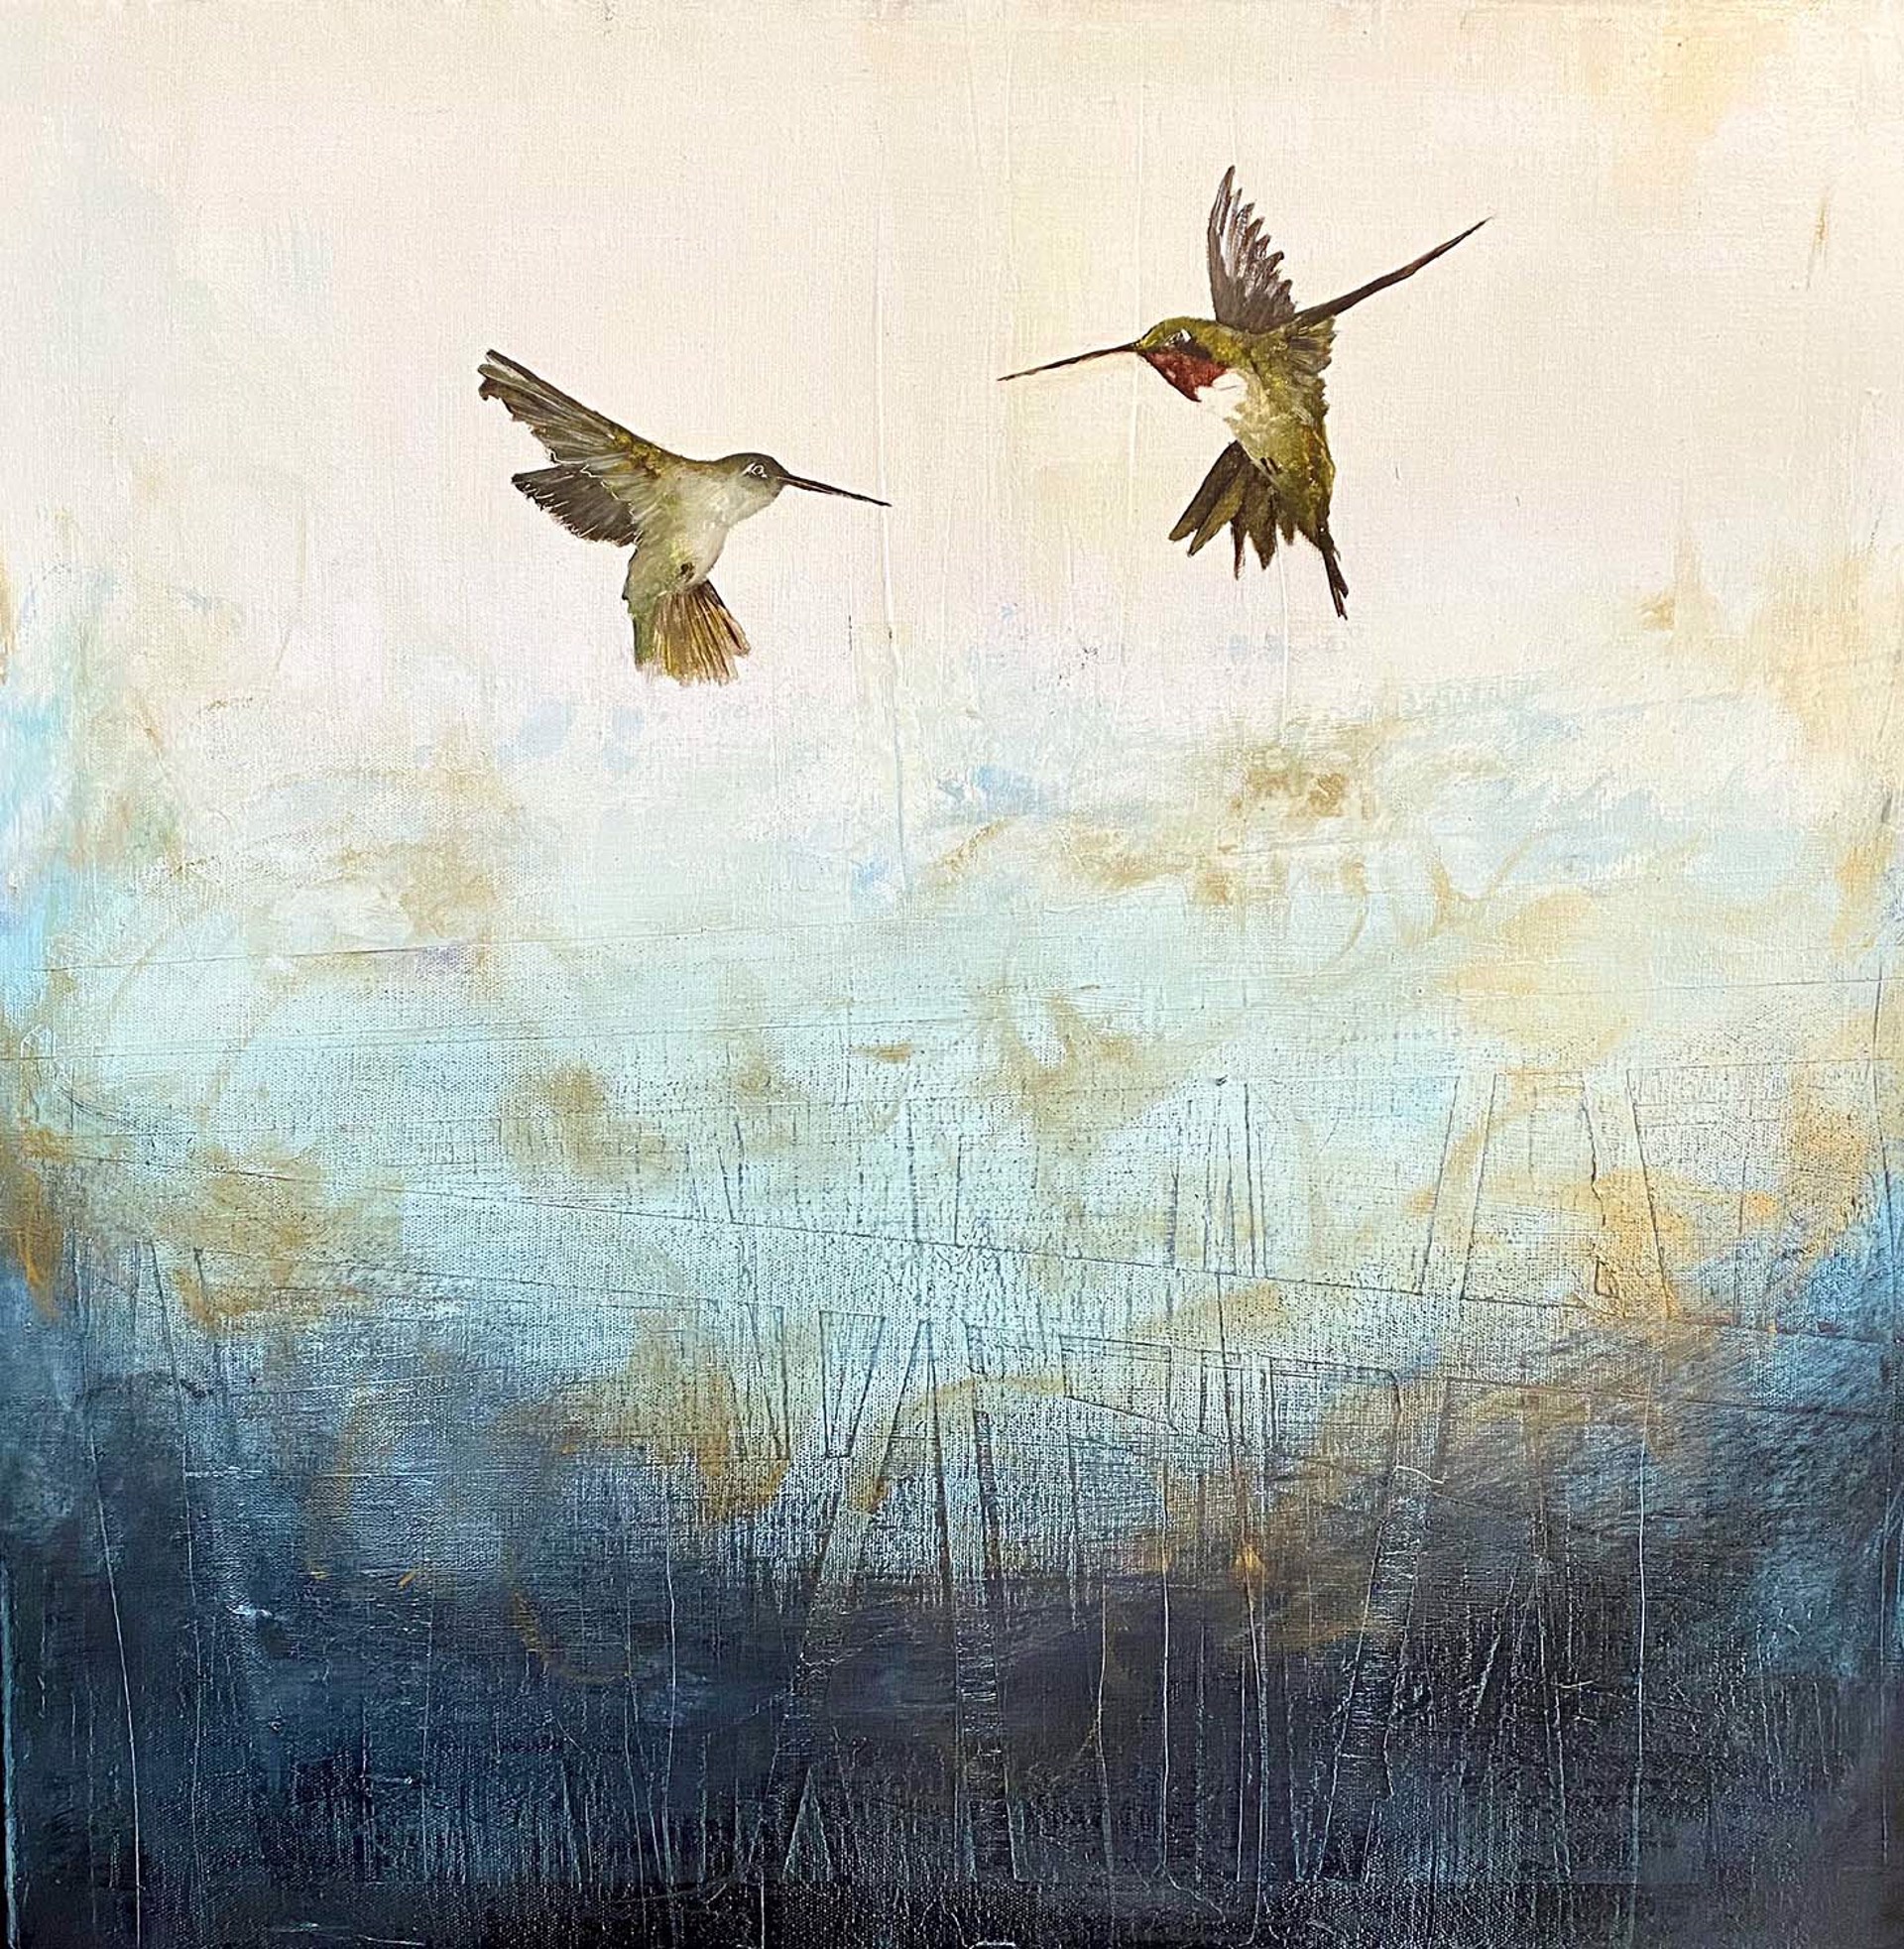 A Contemporary Painting Of Two Flying Hummingbirds On A Blue And Gold Background By Jenna Von Benedikt At Gallery Wild